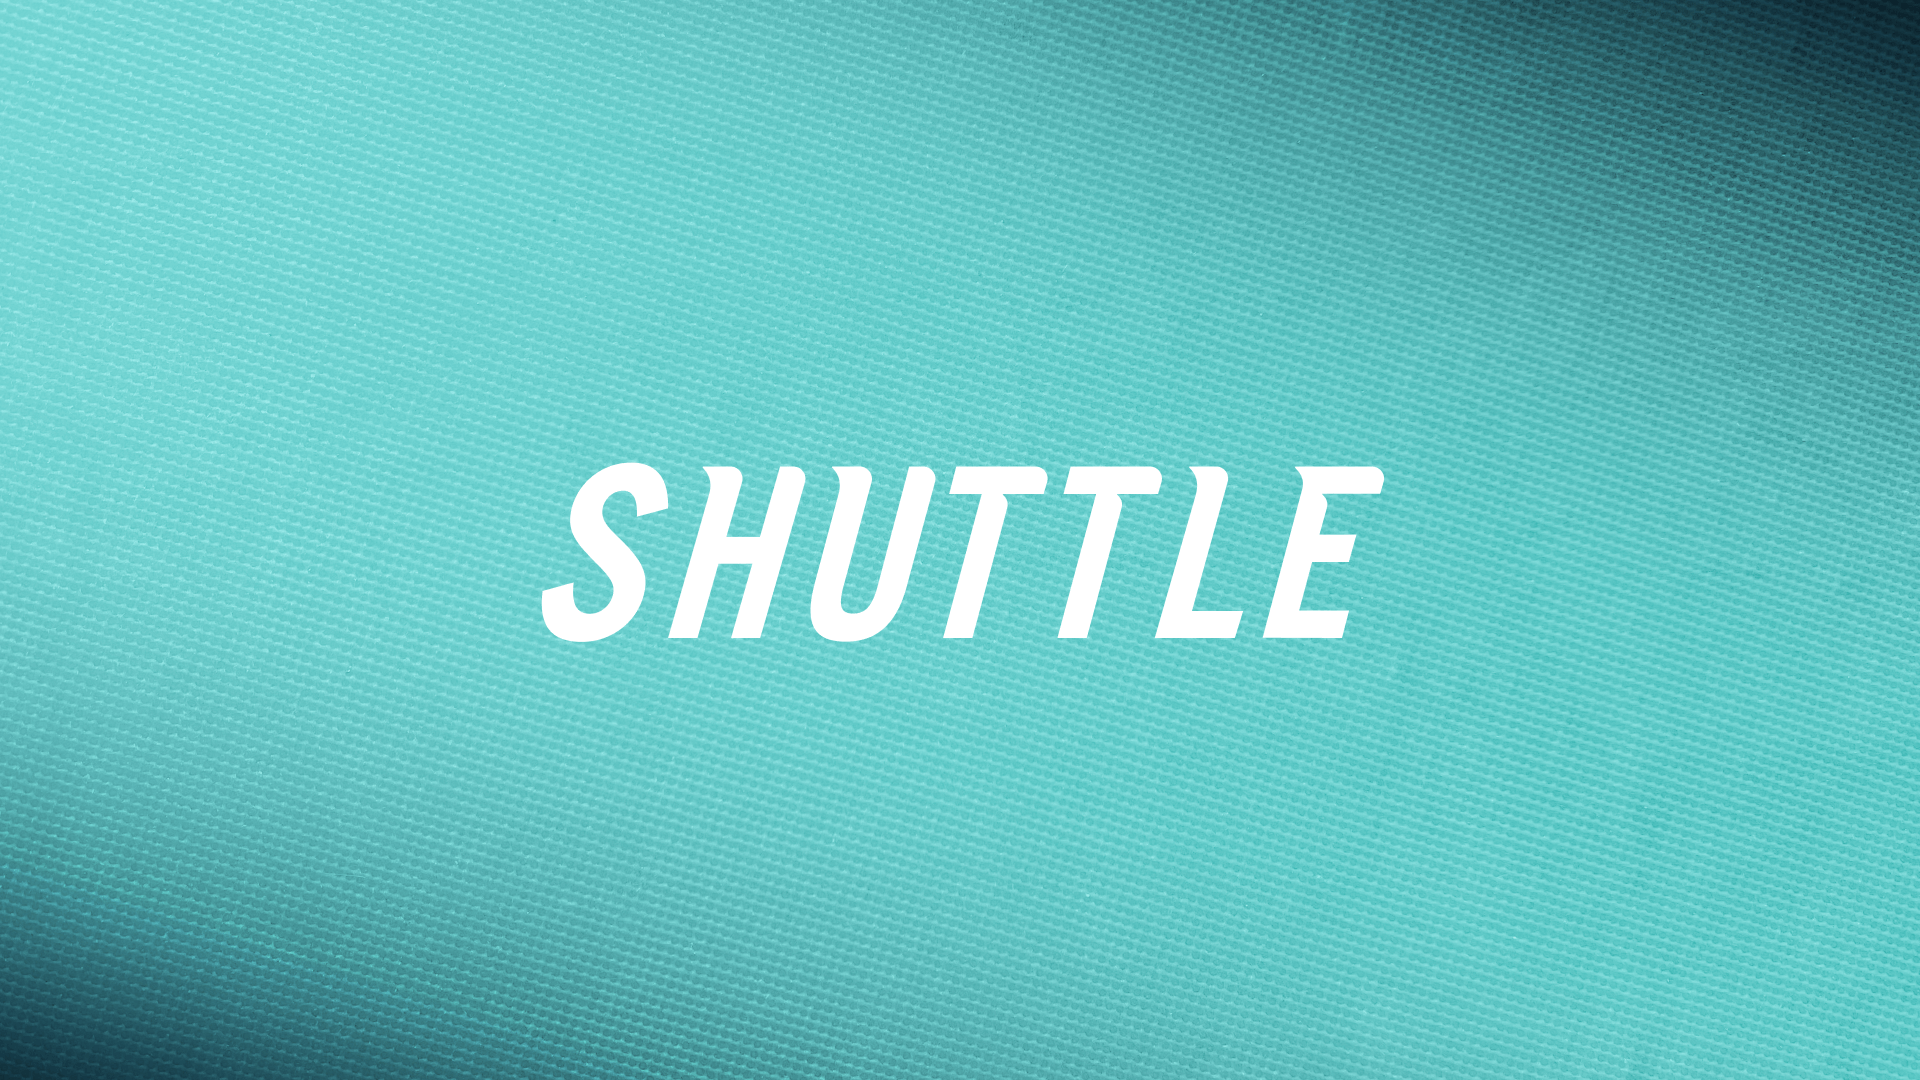 A graphic with text "Shuttle" on a teal background.